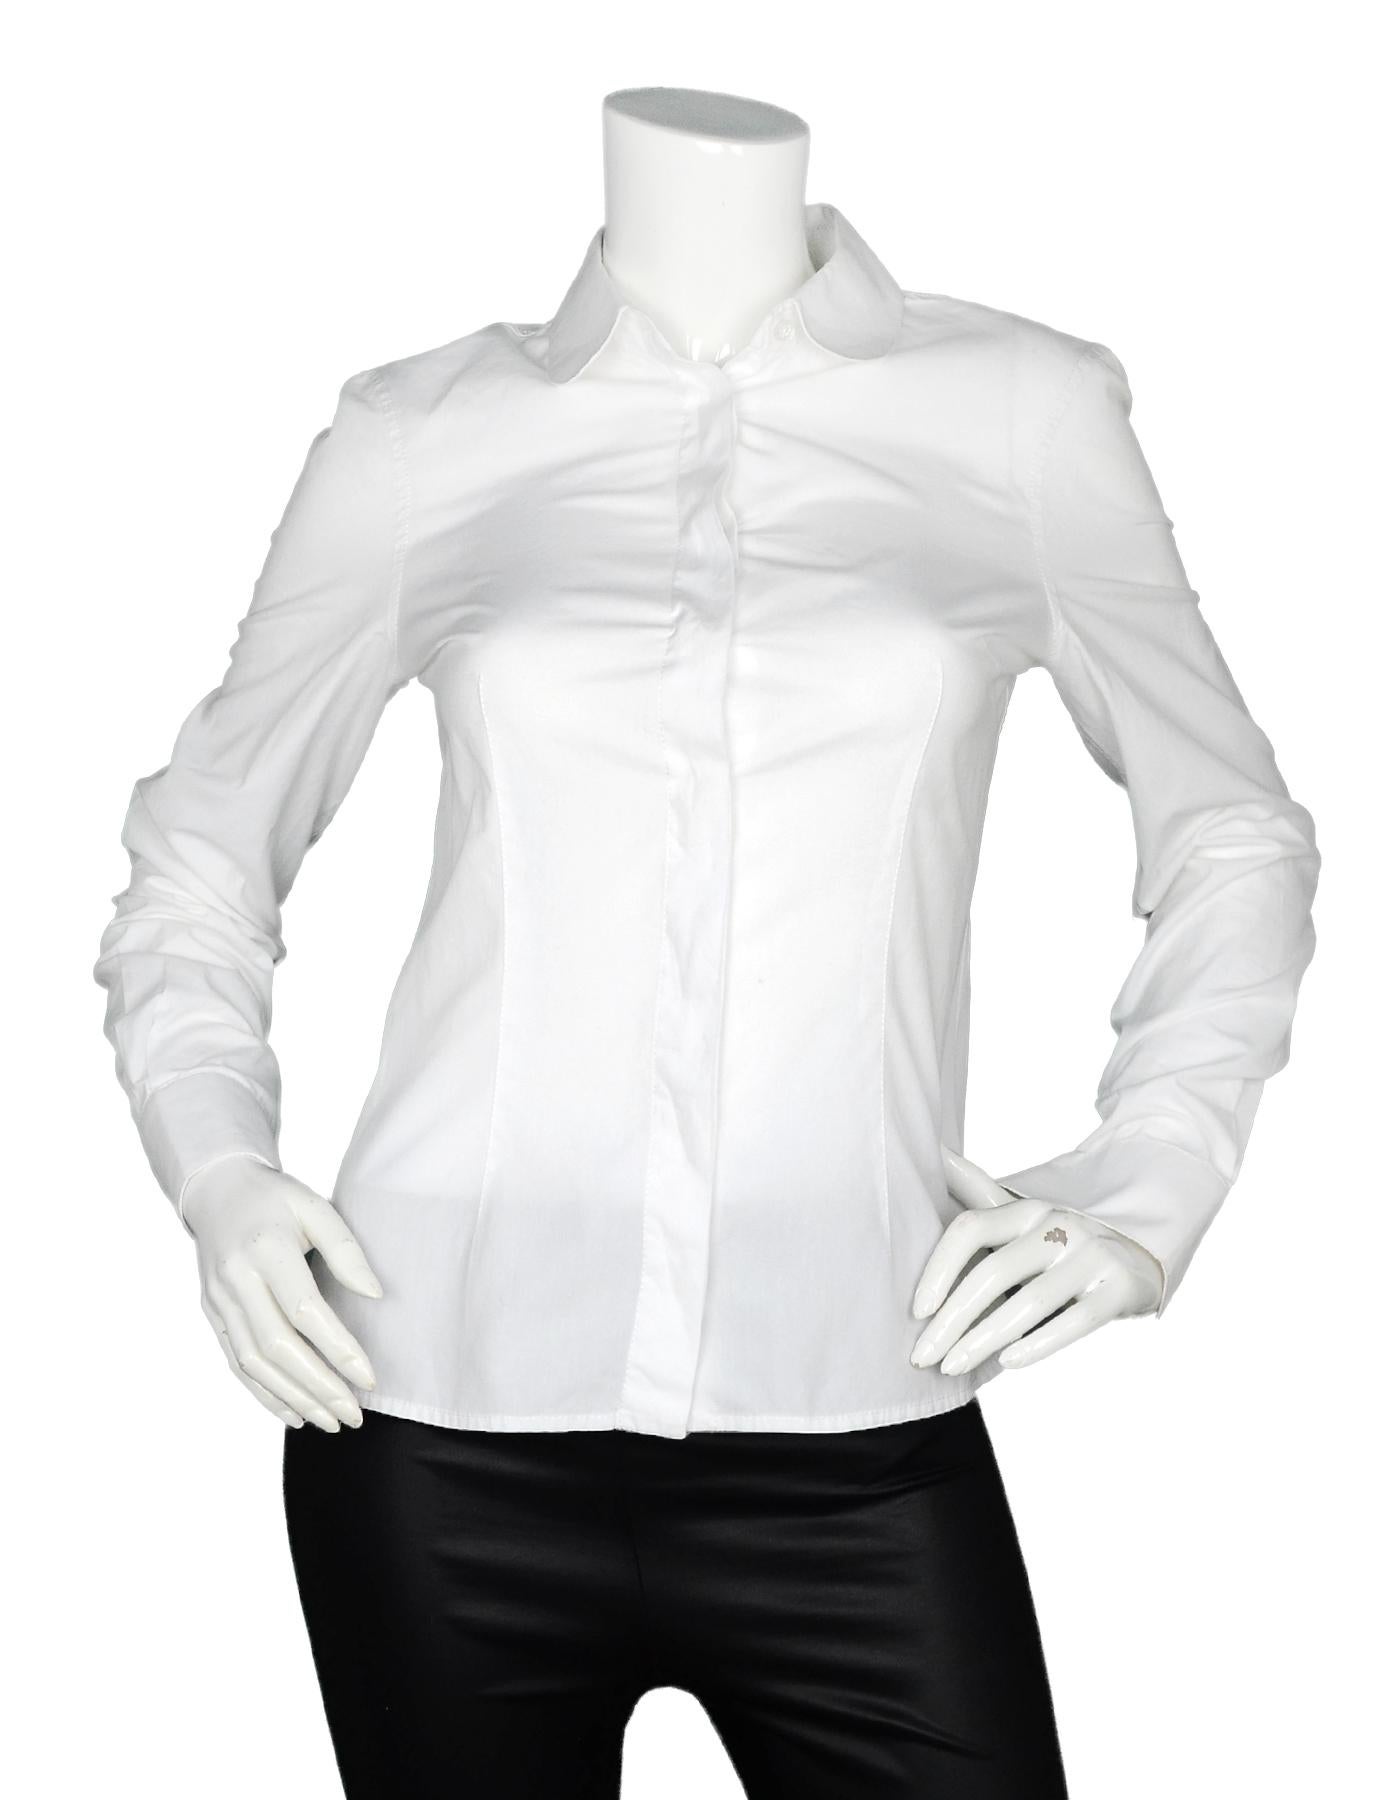 Alexander McQueen White Cotton Button Down Longsleeve Blouse Sz 40

Made In: Italy
Color: White
Materials: 100% cotton
Opening/Closure: Button down
Overall Condition: Excellent pre-owned condition with exception of small stain on sleeve (see